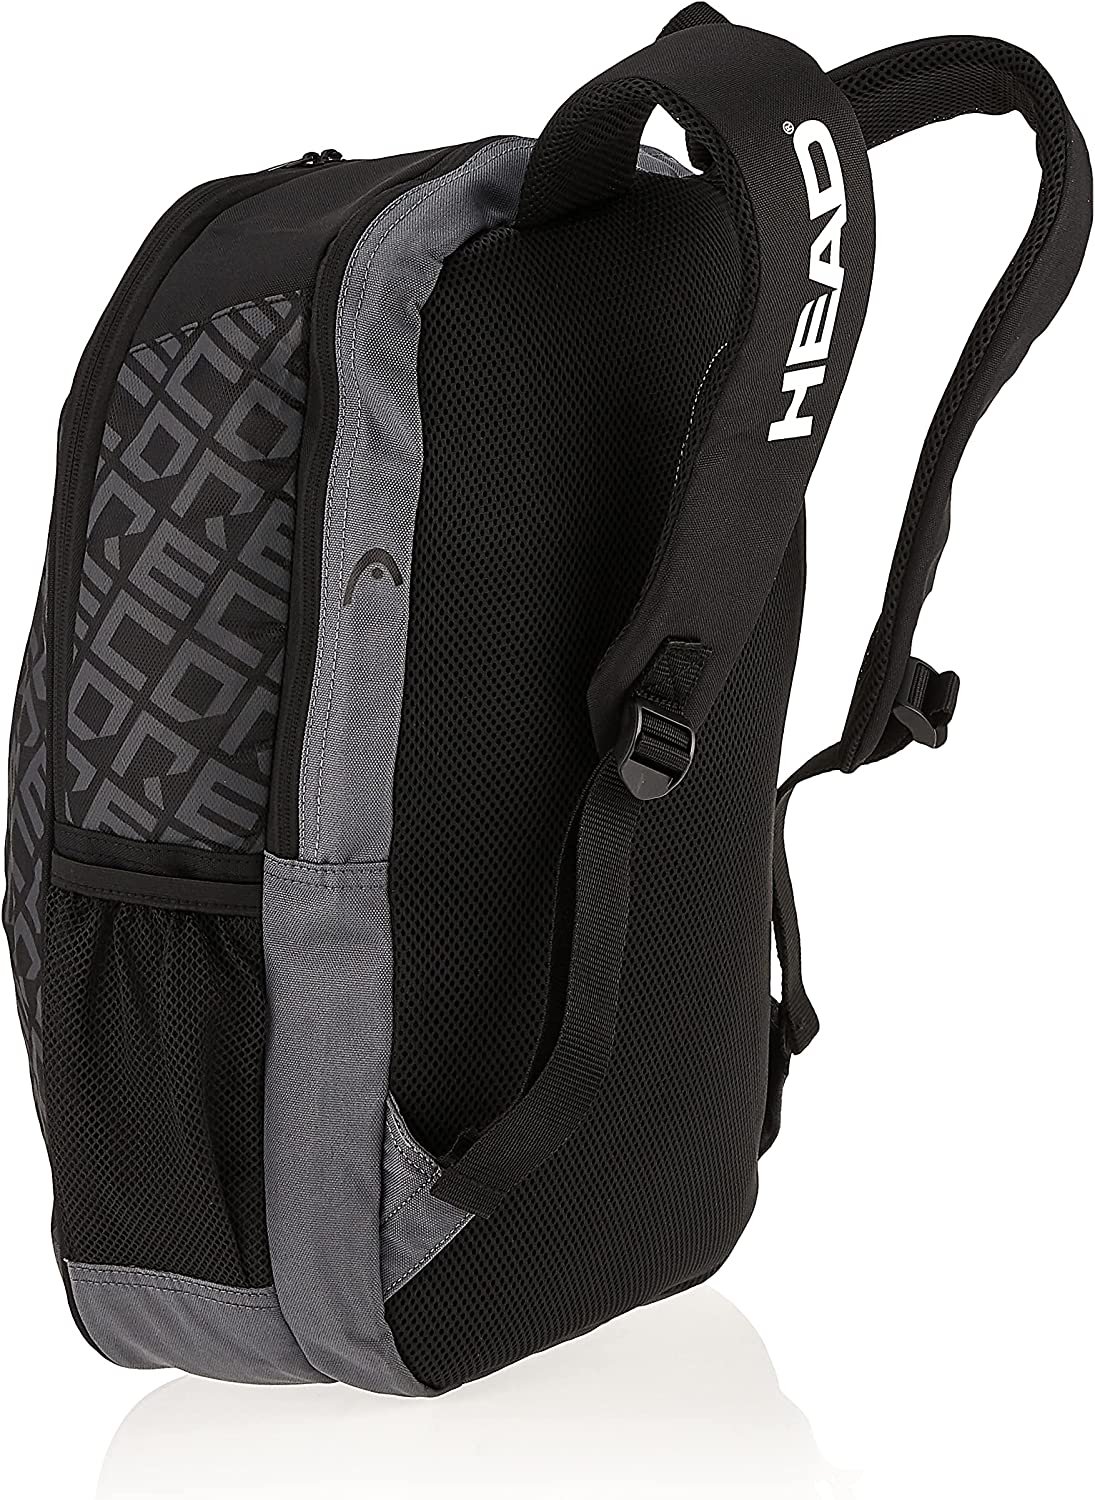 HEAD Gray and Black Tennis Sports Equipment Backpack - image 2 of 6